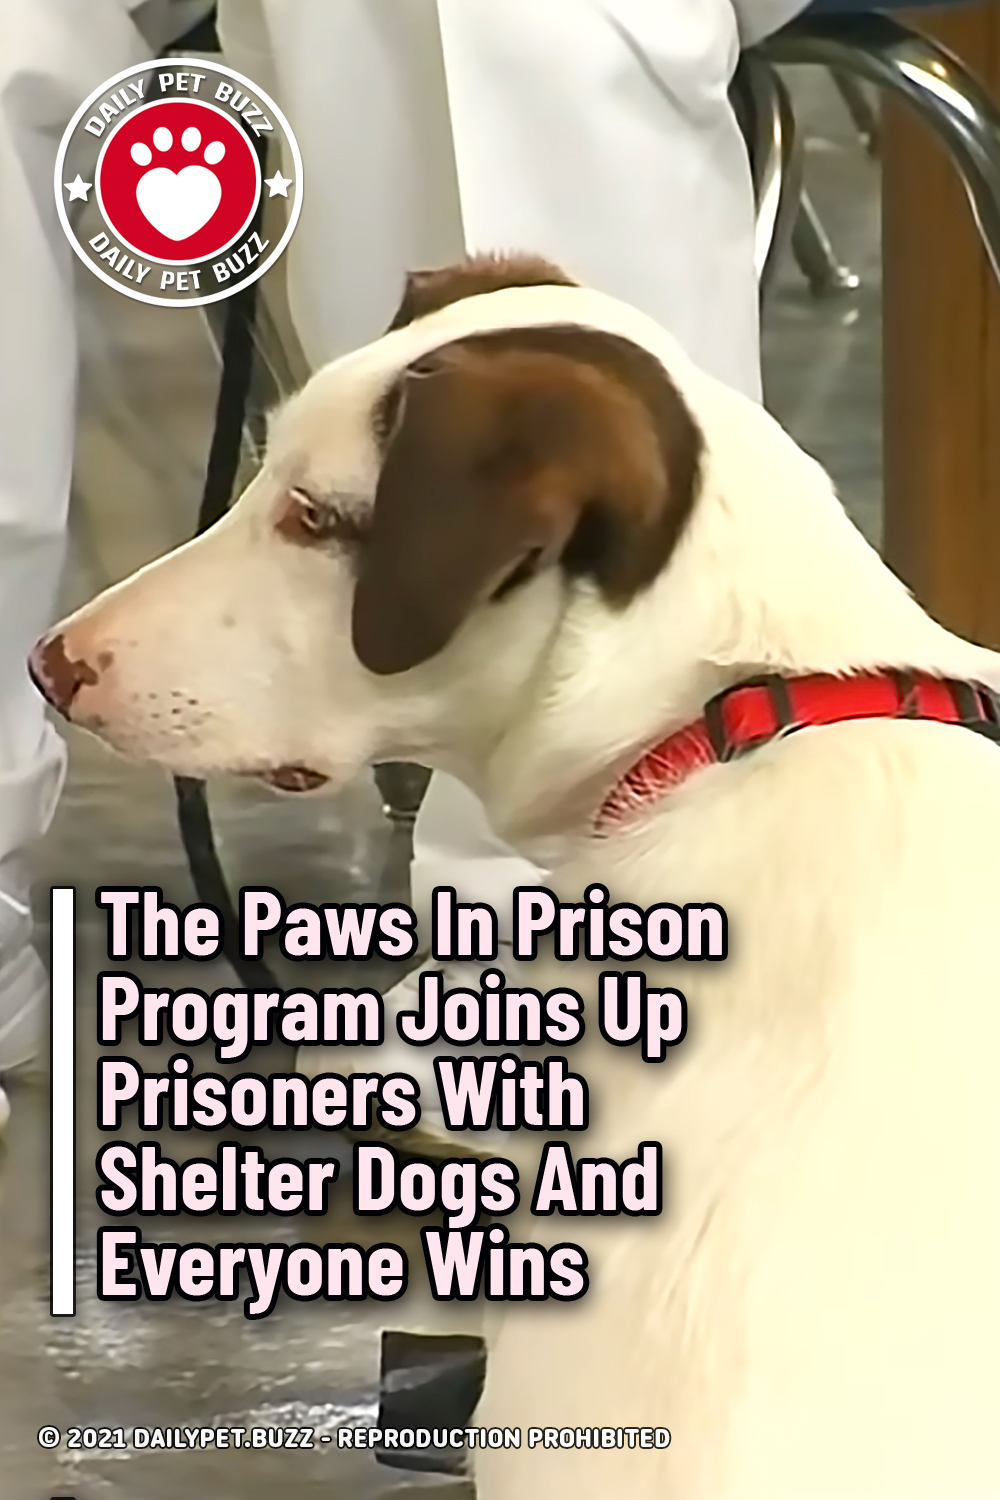 The Paws In Prison Program Joins Up Prisoners With Shelter Dogs And